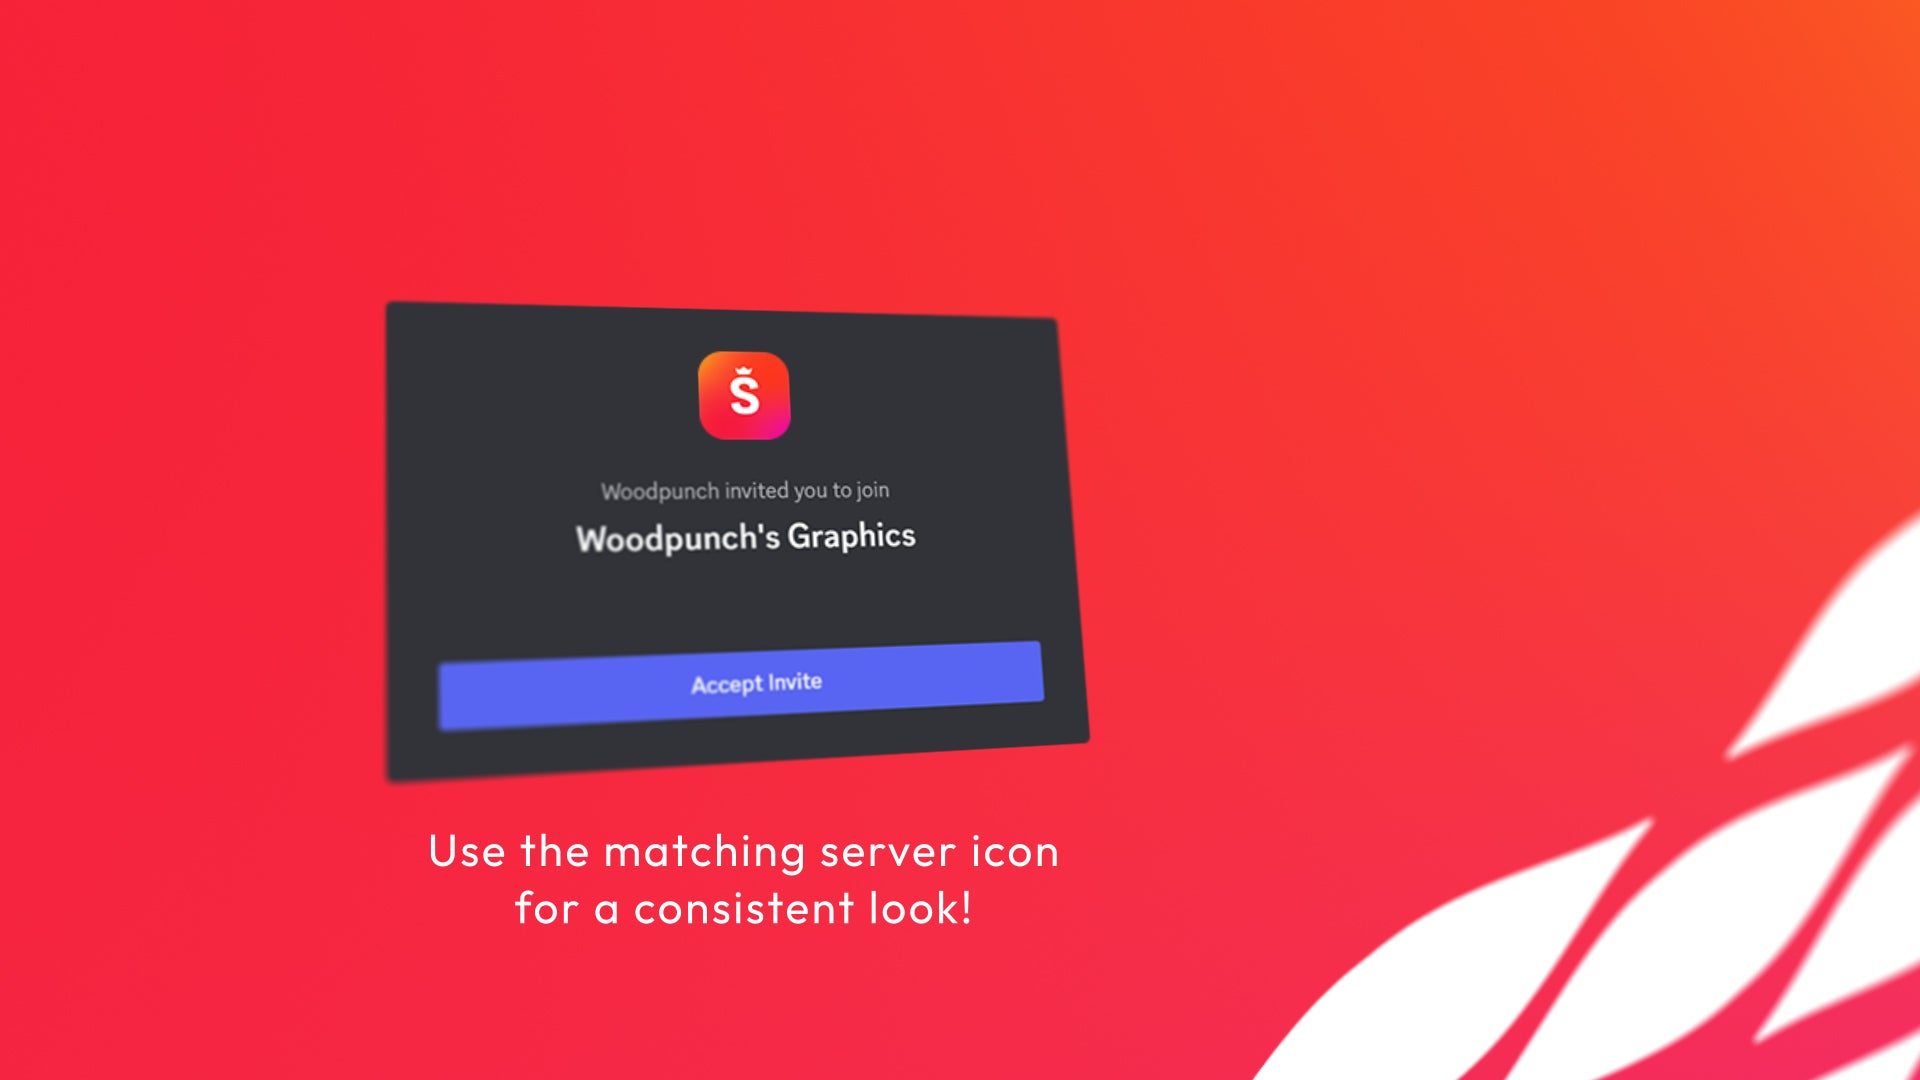 Matches with a server icon